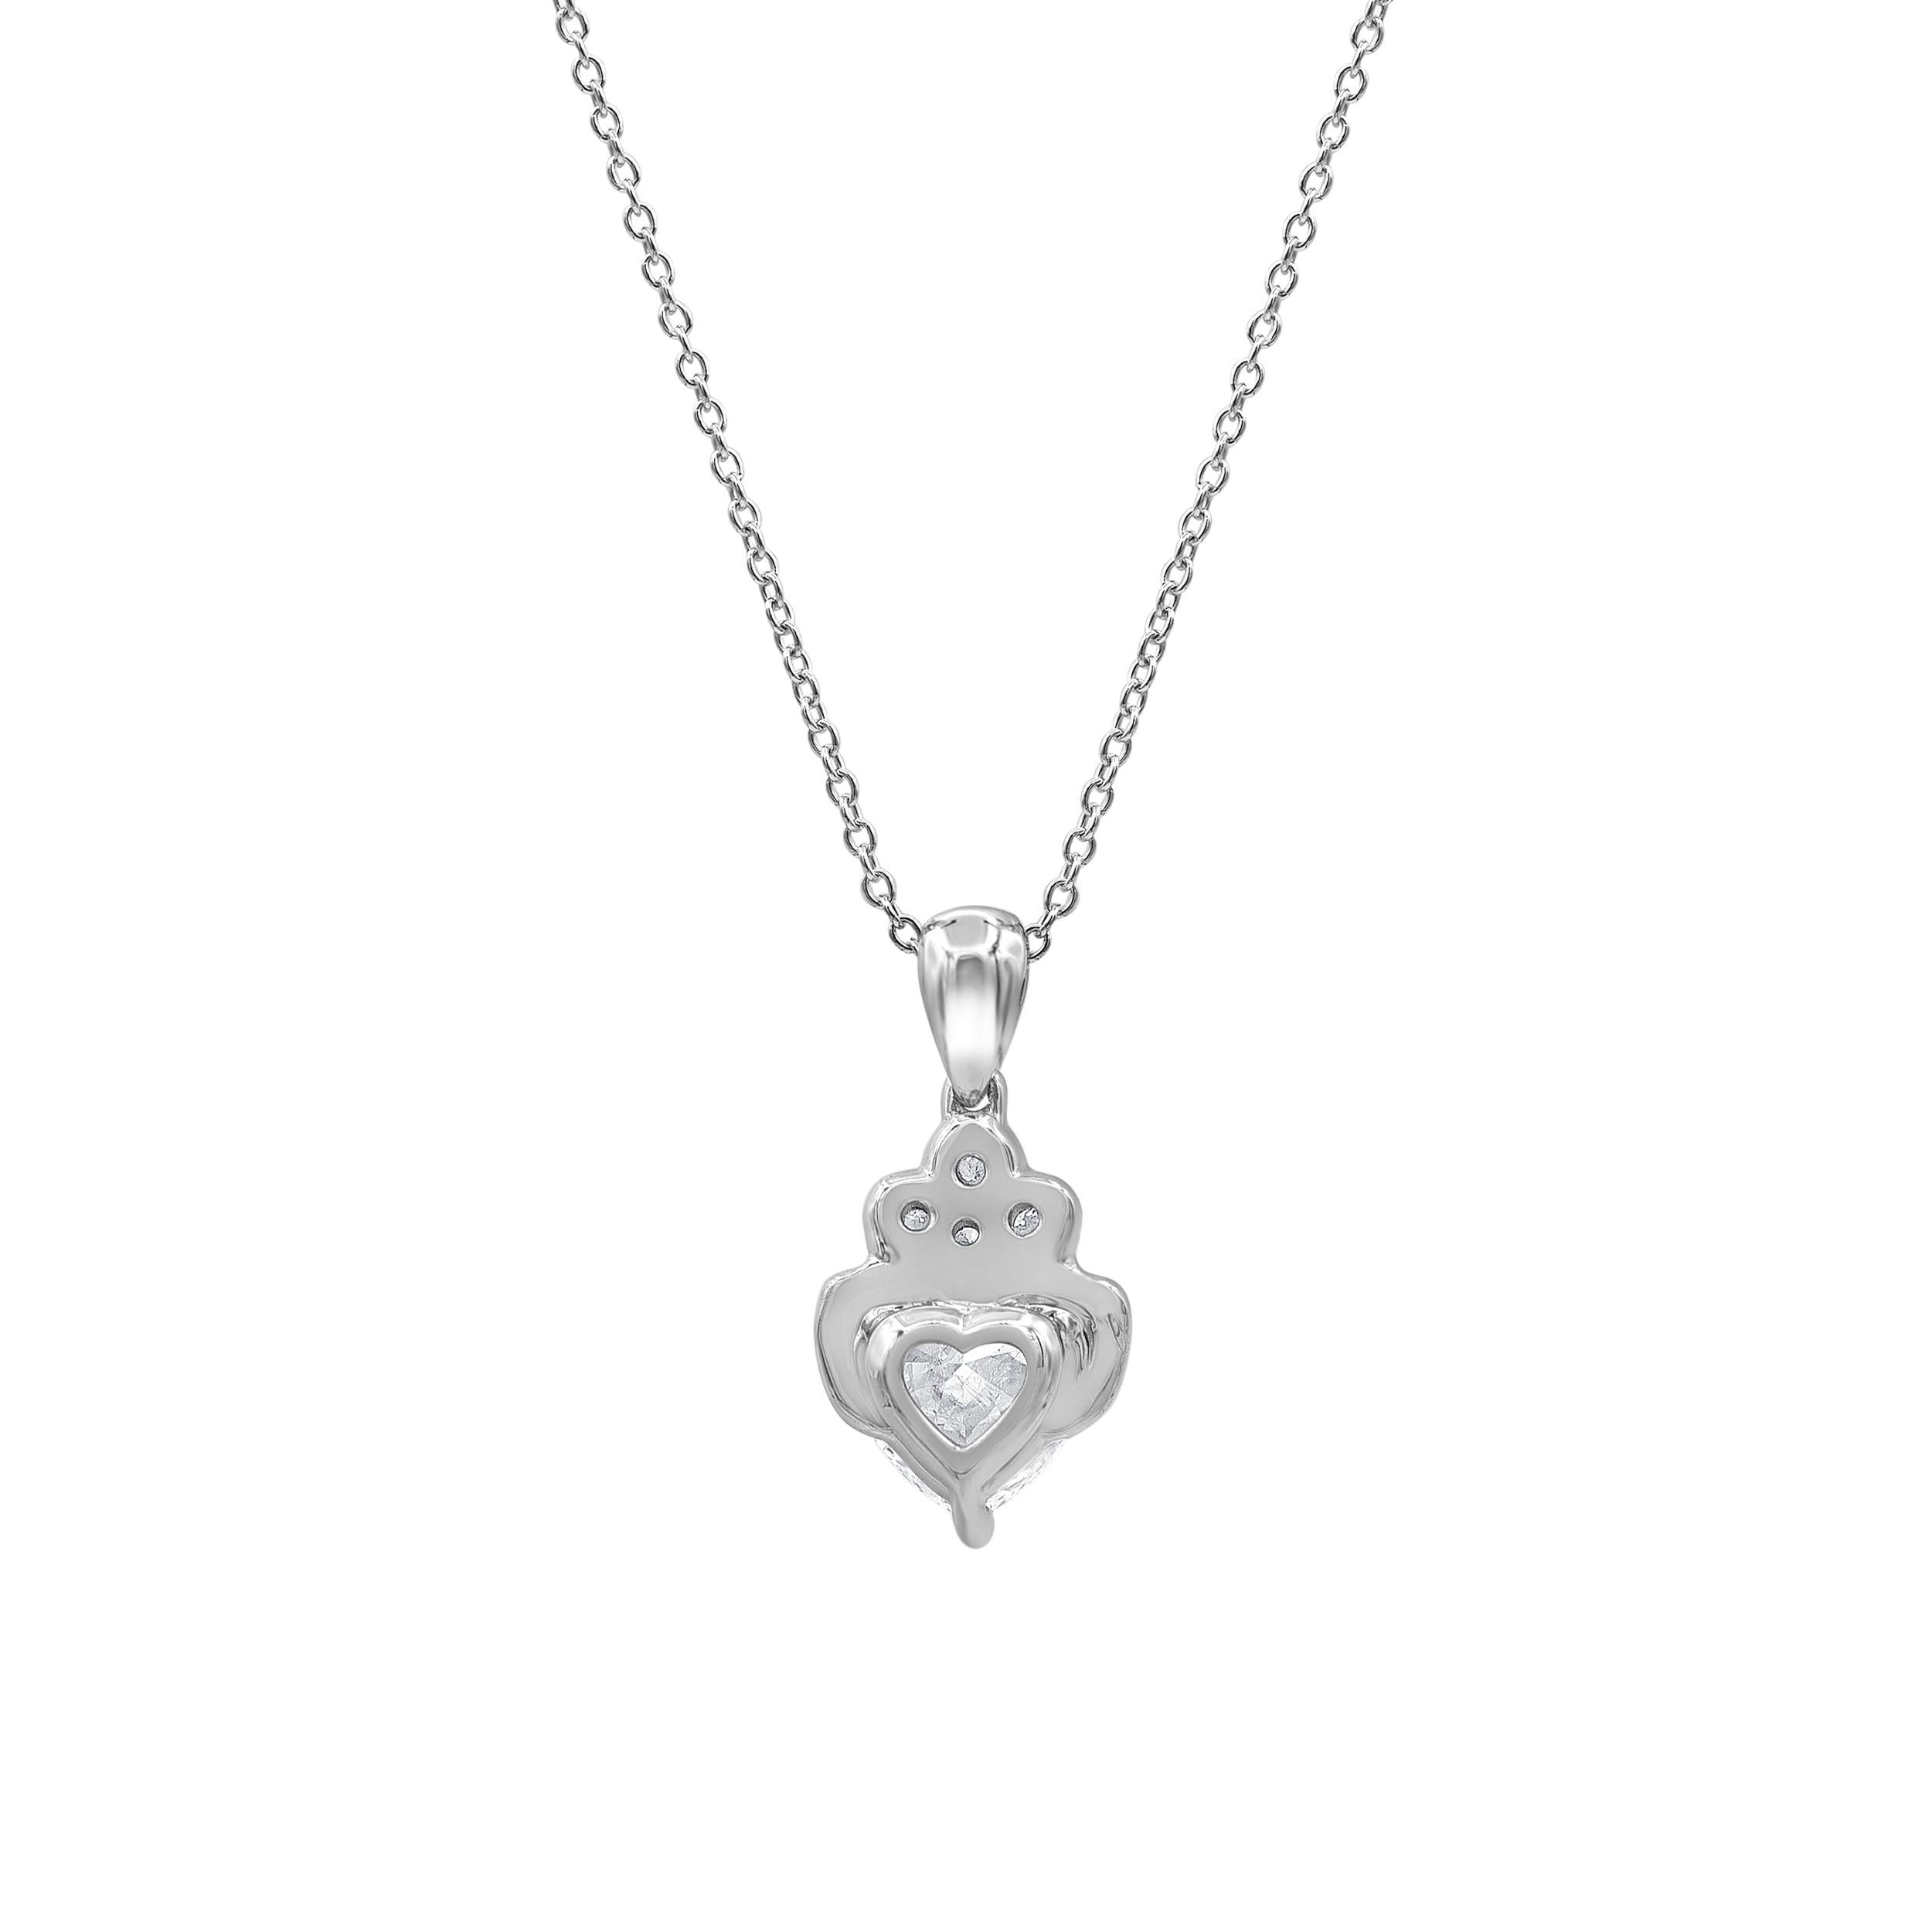 Evocative and exquisite is this 18K White Gold Diamond Heart Pendant. Add this heart solitaire to your wedding dress and be picture perfect for your wedding day. This Diamond Pendant makes for an enchanting and irresistible bridesmaids gift. Do not